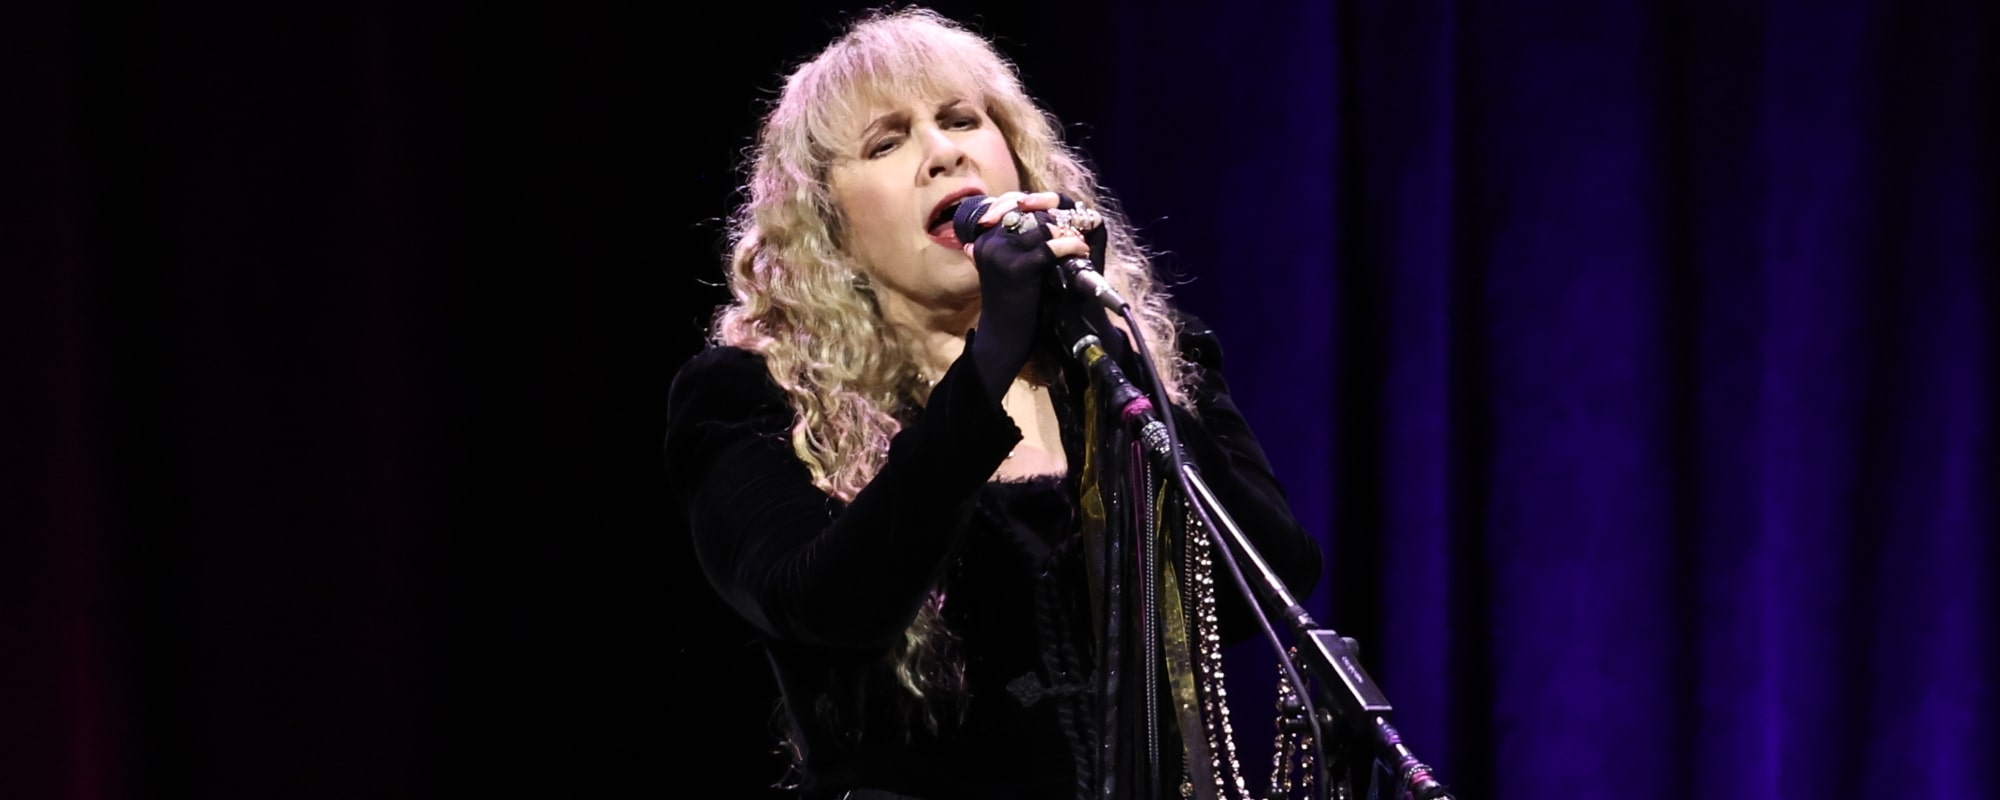 Stevie Nicks Announces Trio of Special Guests for Her BST Hyde Park Headlining Show